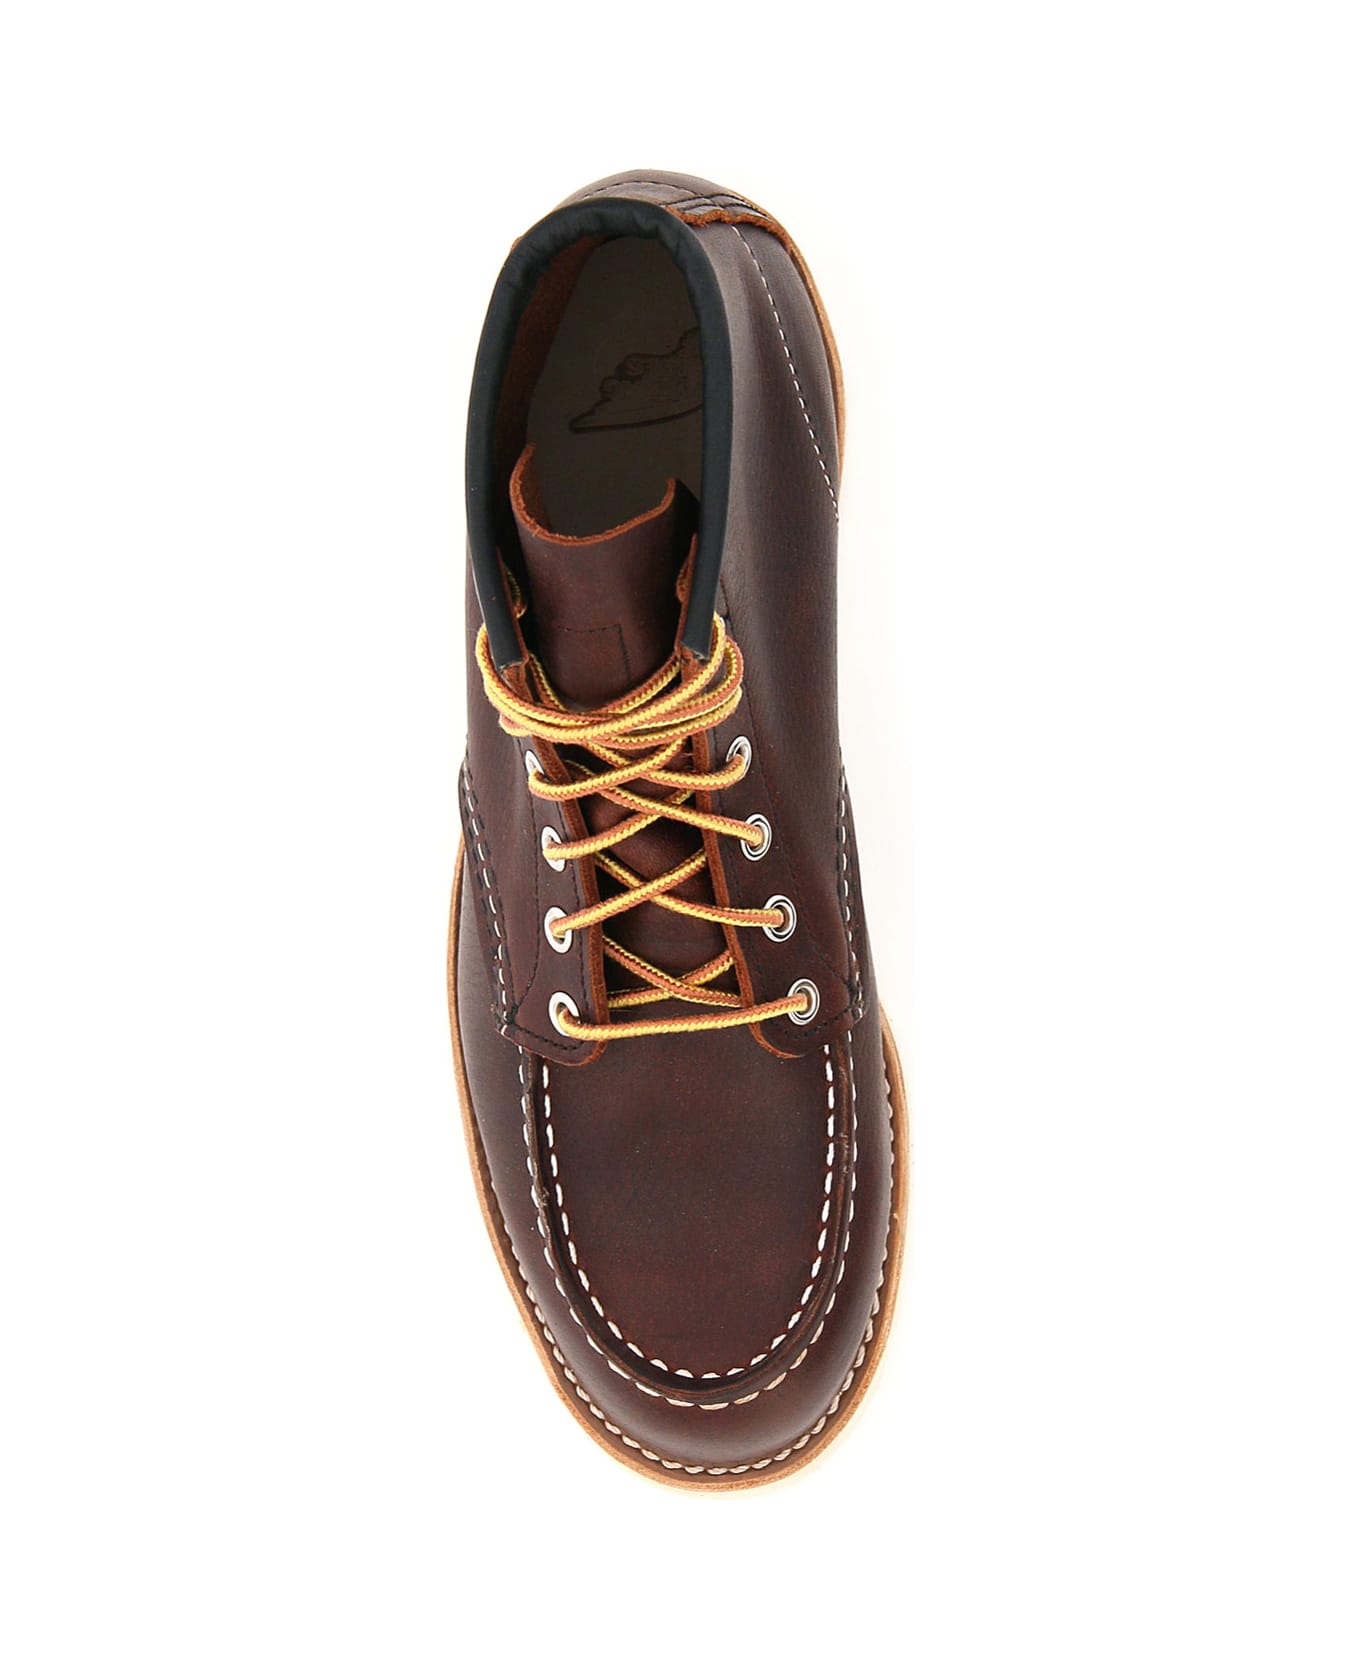 Red Wing Classic Moc Ankle Boots - BRIAR OIL (Brown)